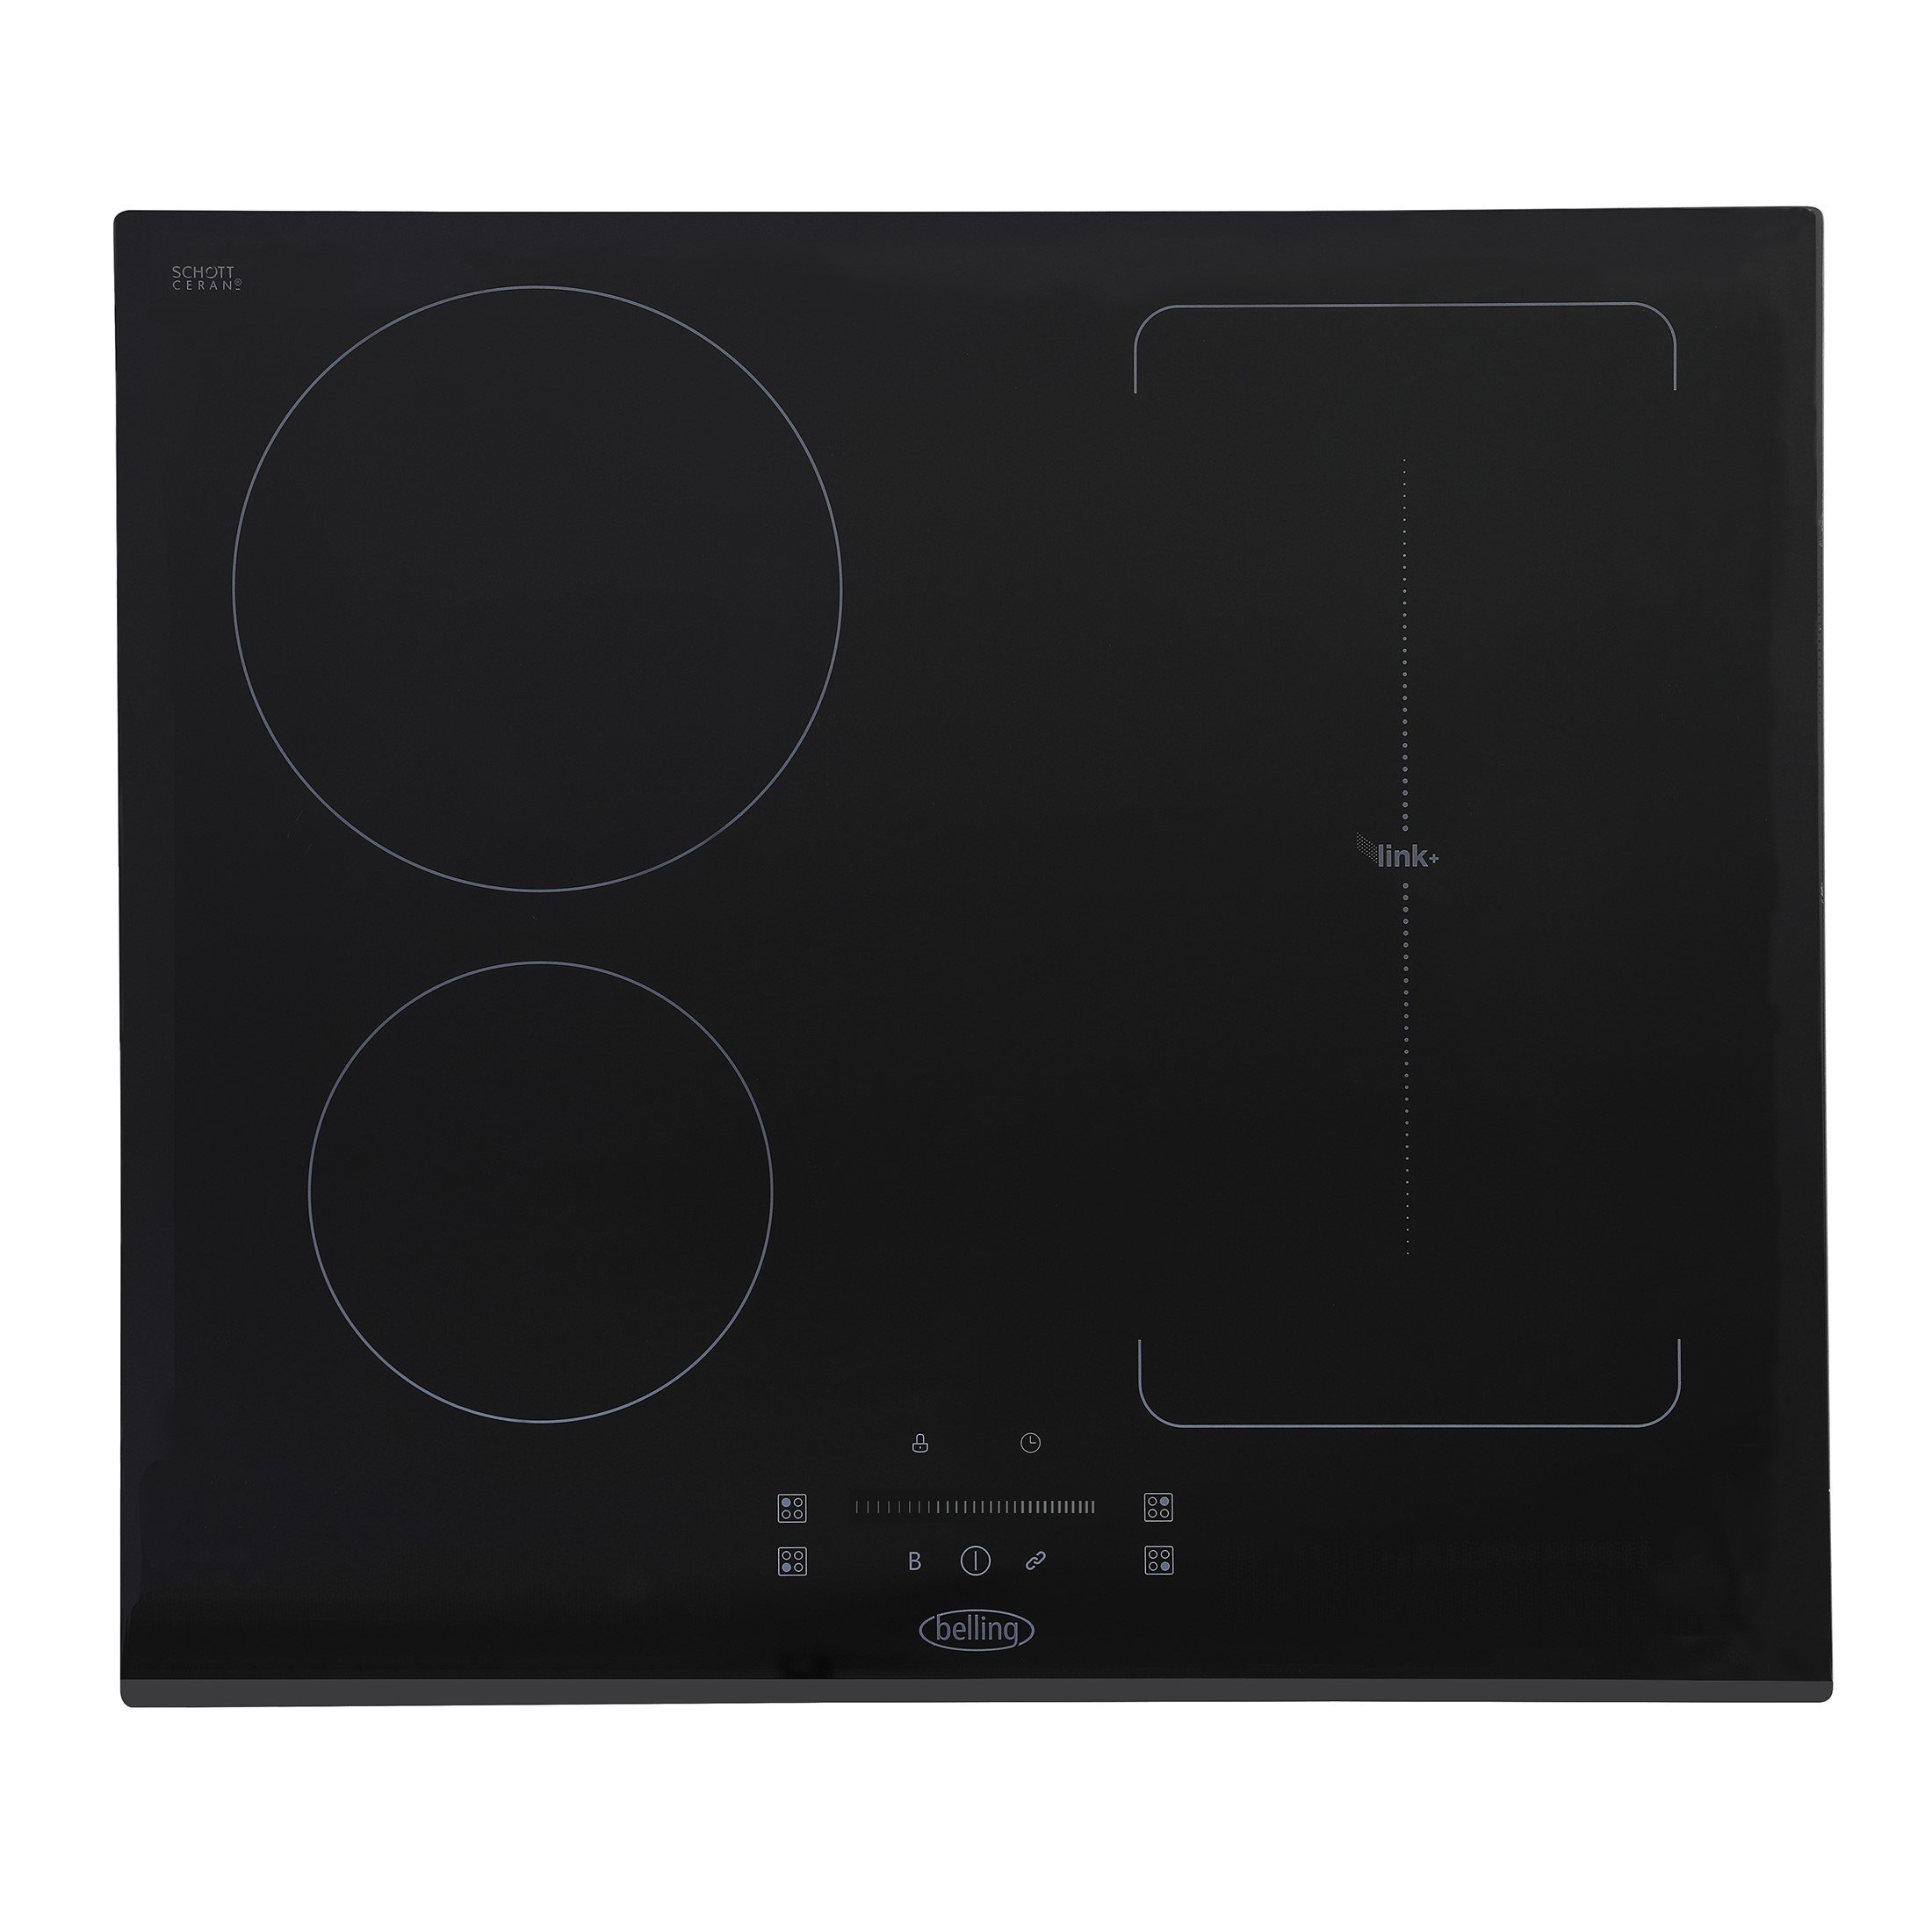 60cm touch control induction hob with nine power levels, Link+, timer, child lock & pan detection